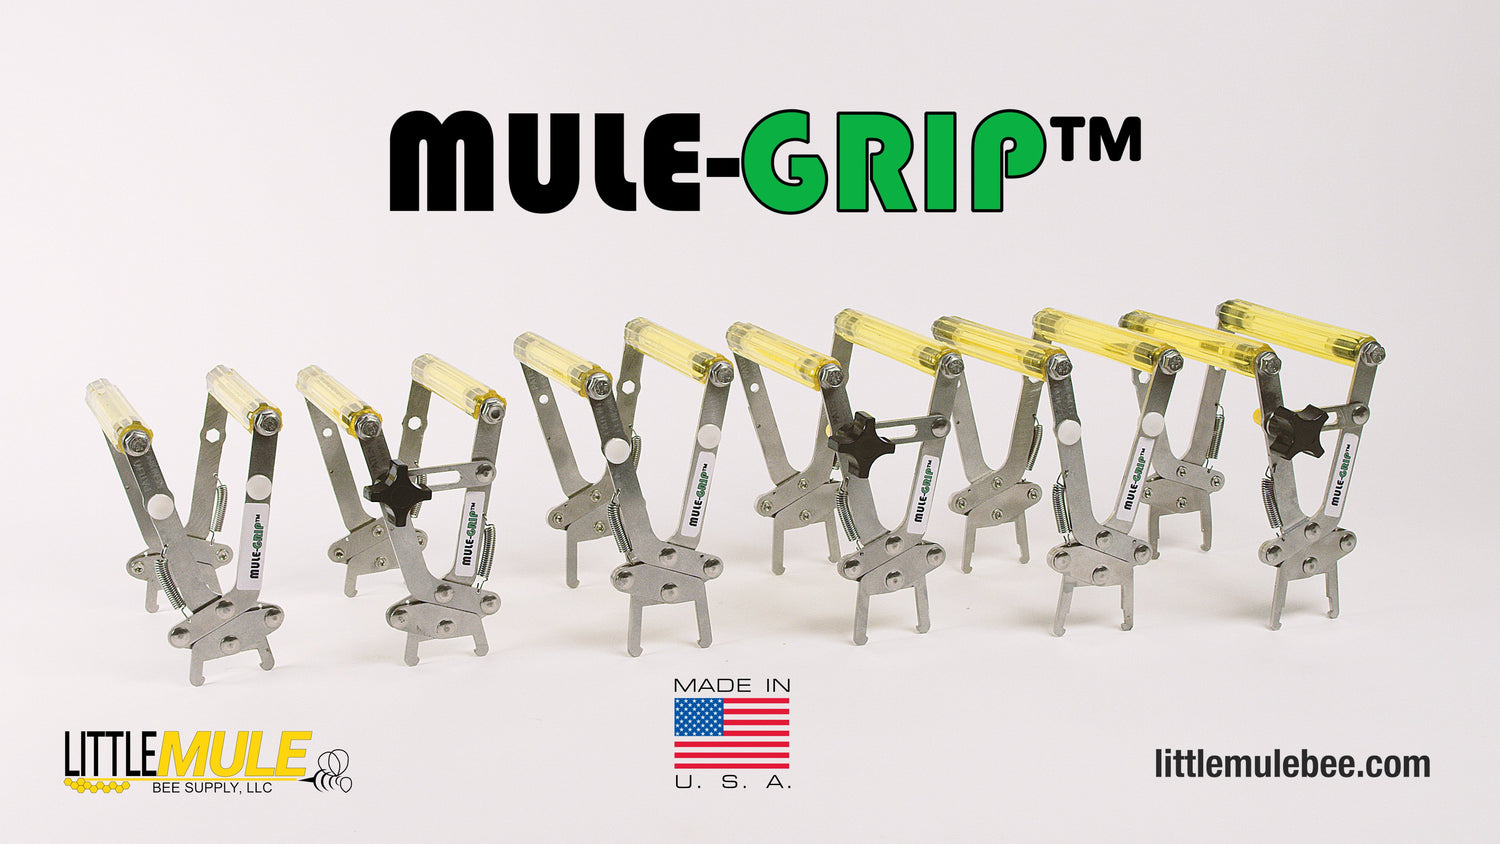 MULE-GRIP™  Woods, Plastics, and Universal Bee Frame Extractor